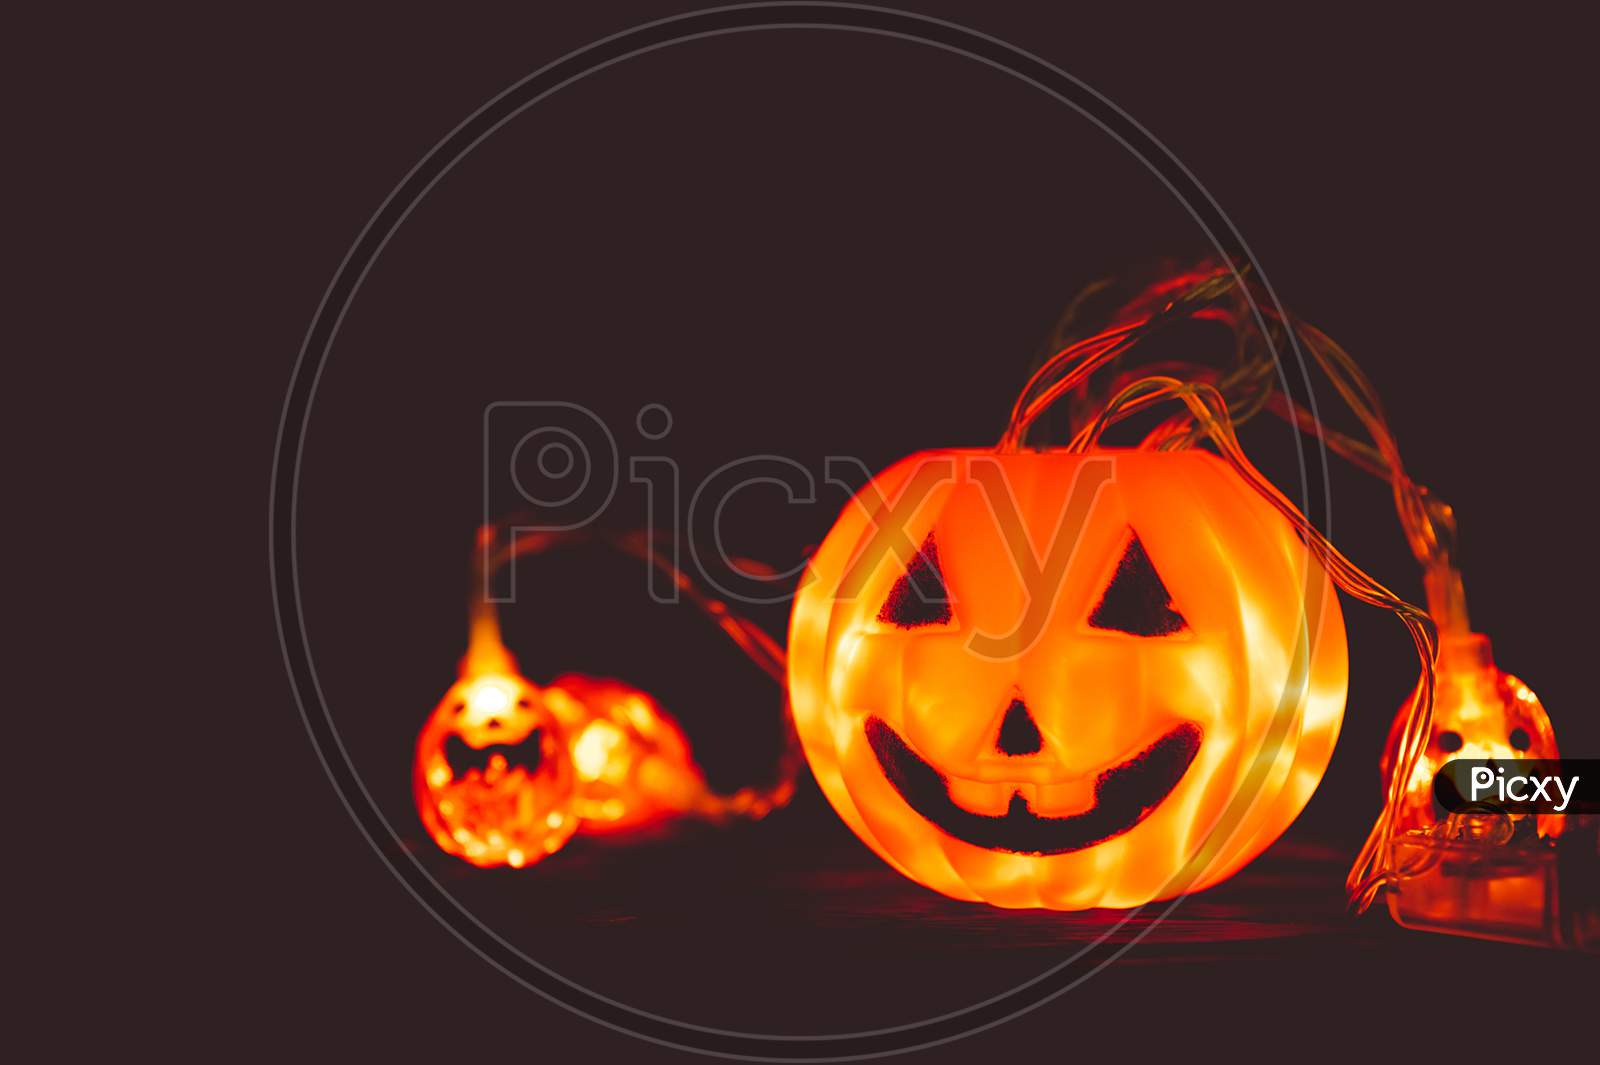 Halloween Pumpkin And Light In Dark, Wooden Background. Halloween Festival Celebration Concept. Low Key Toned. Copy Space